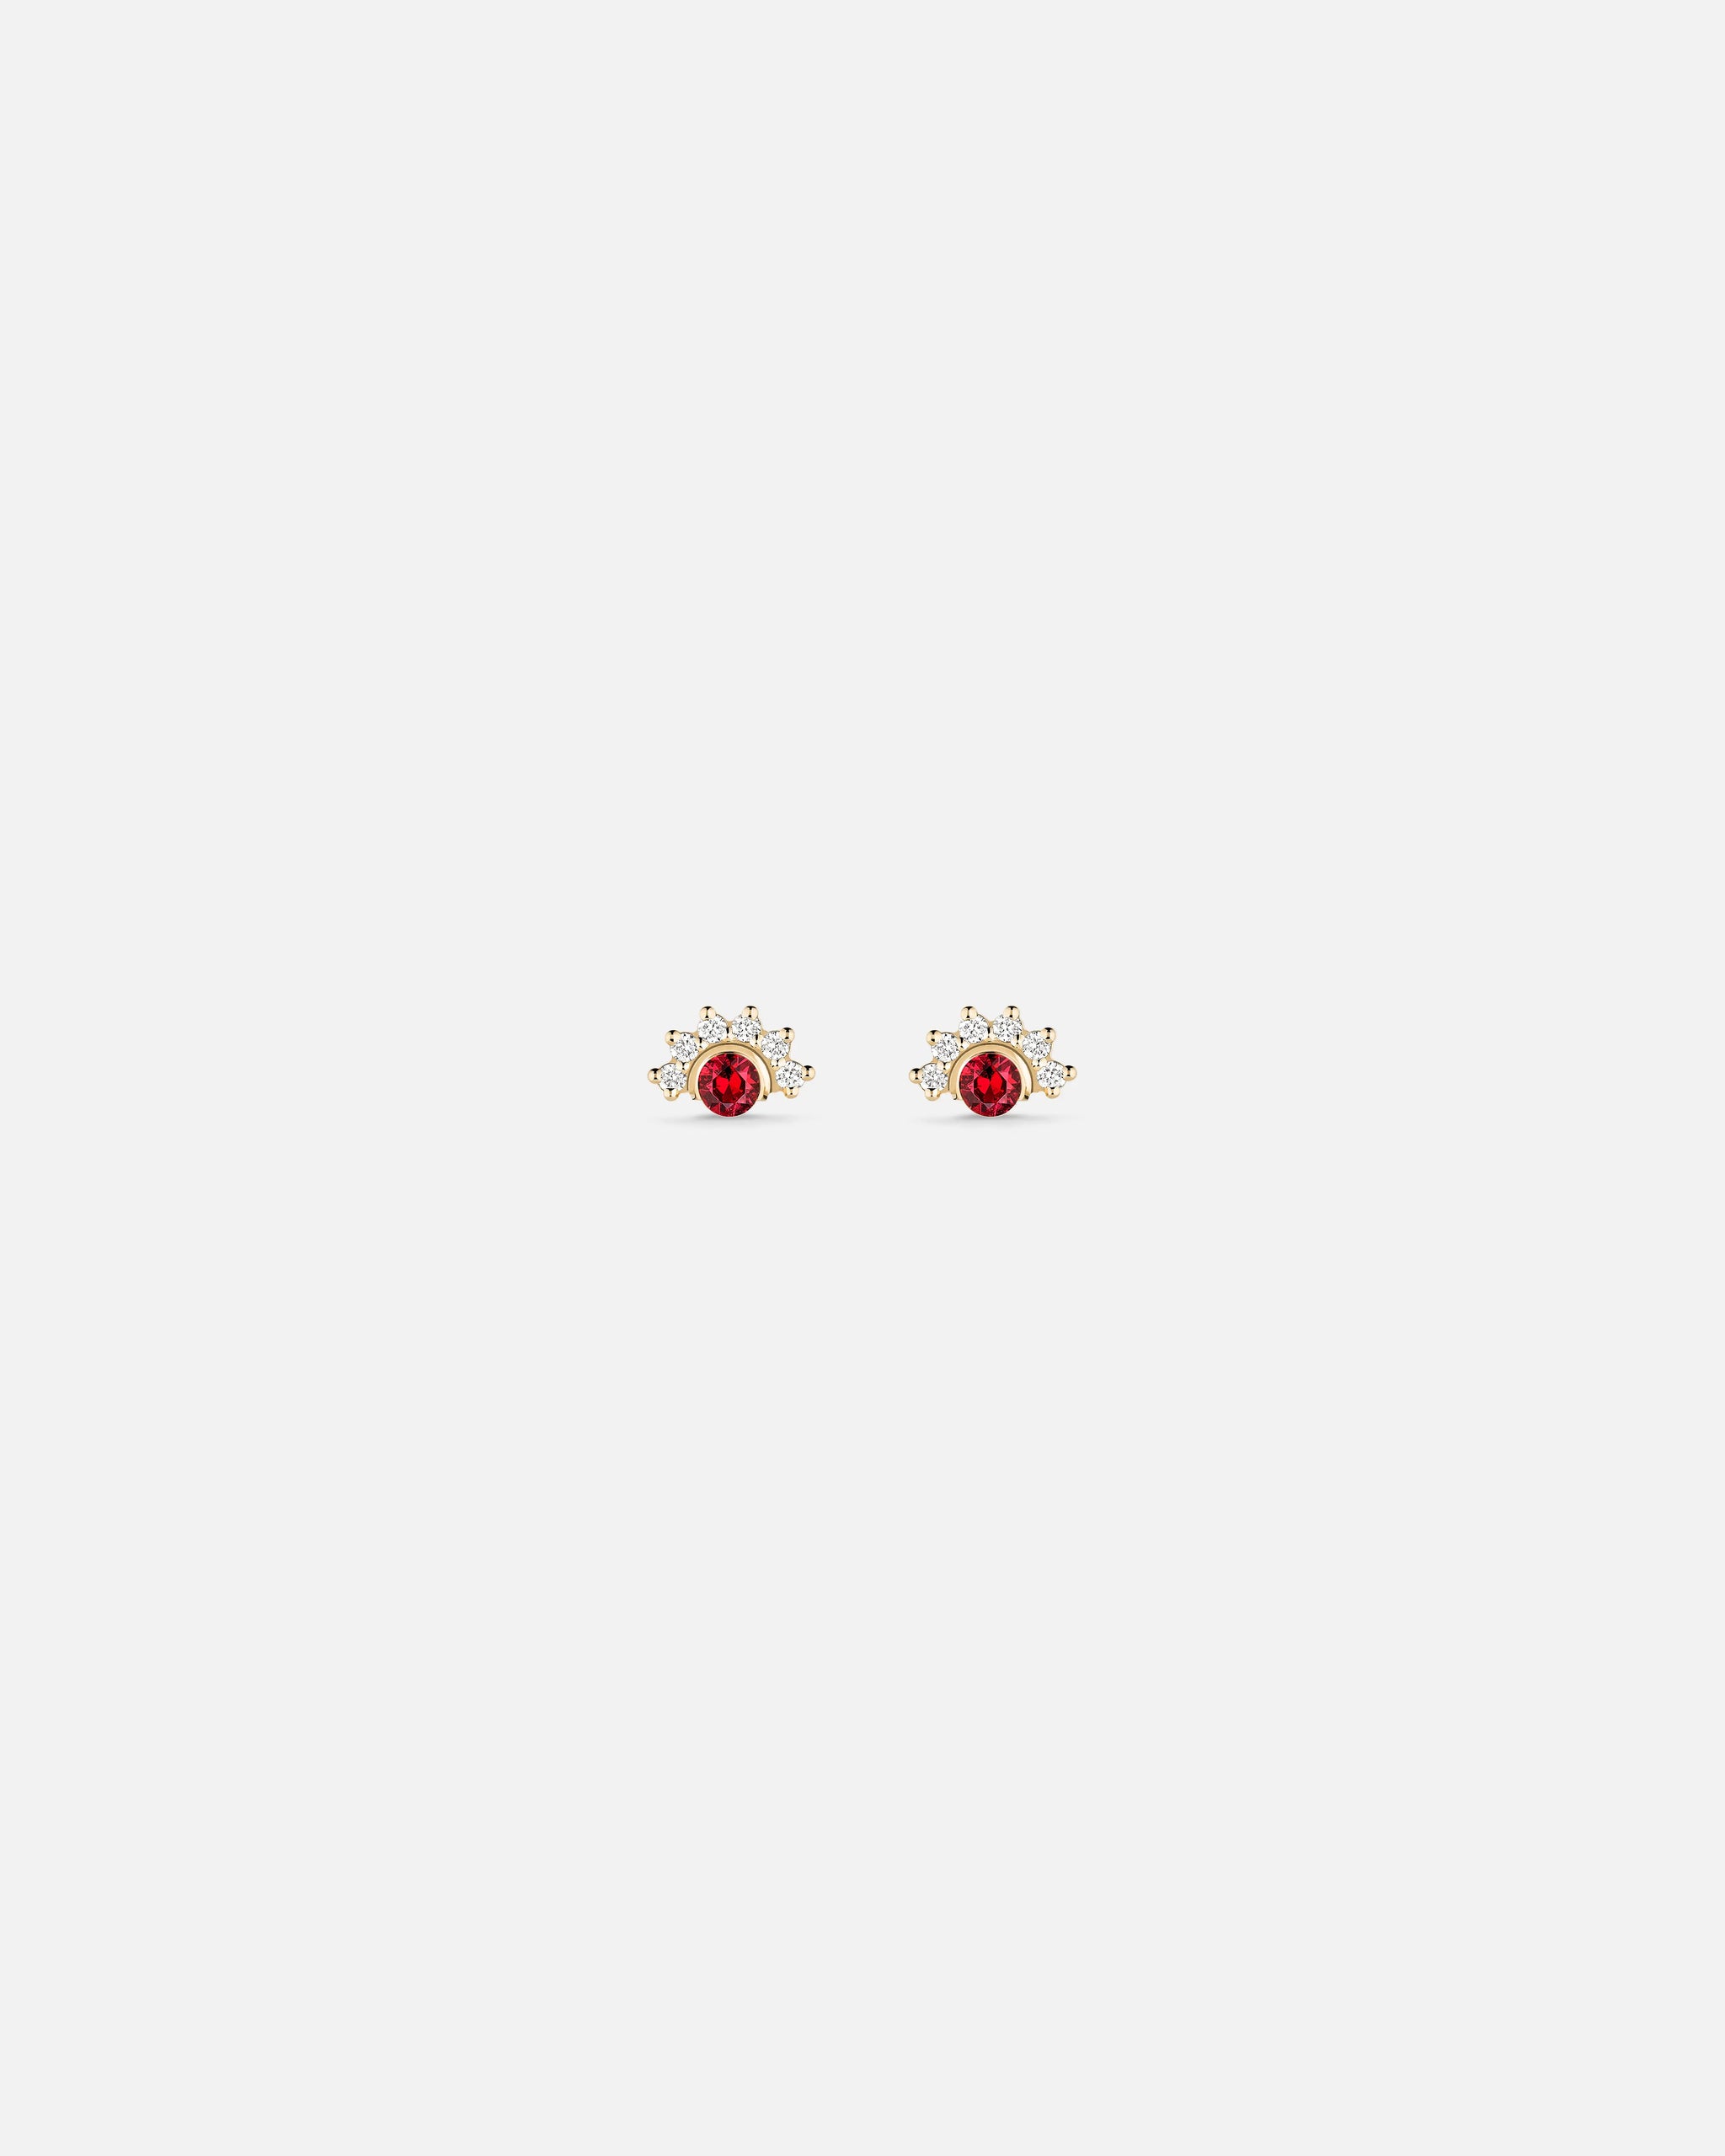 Red Spinel Studs in Yellow Gold - 1 - Nouvel Heritage